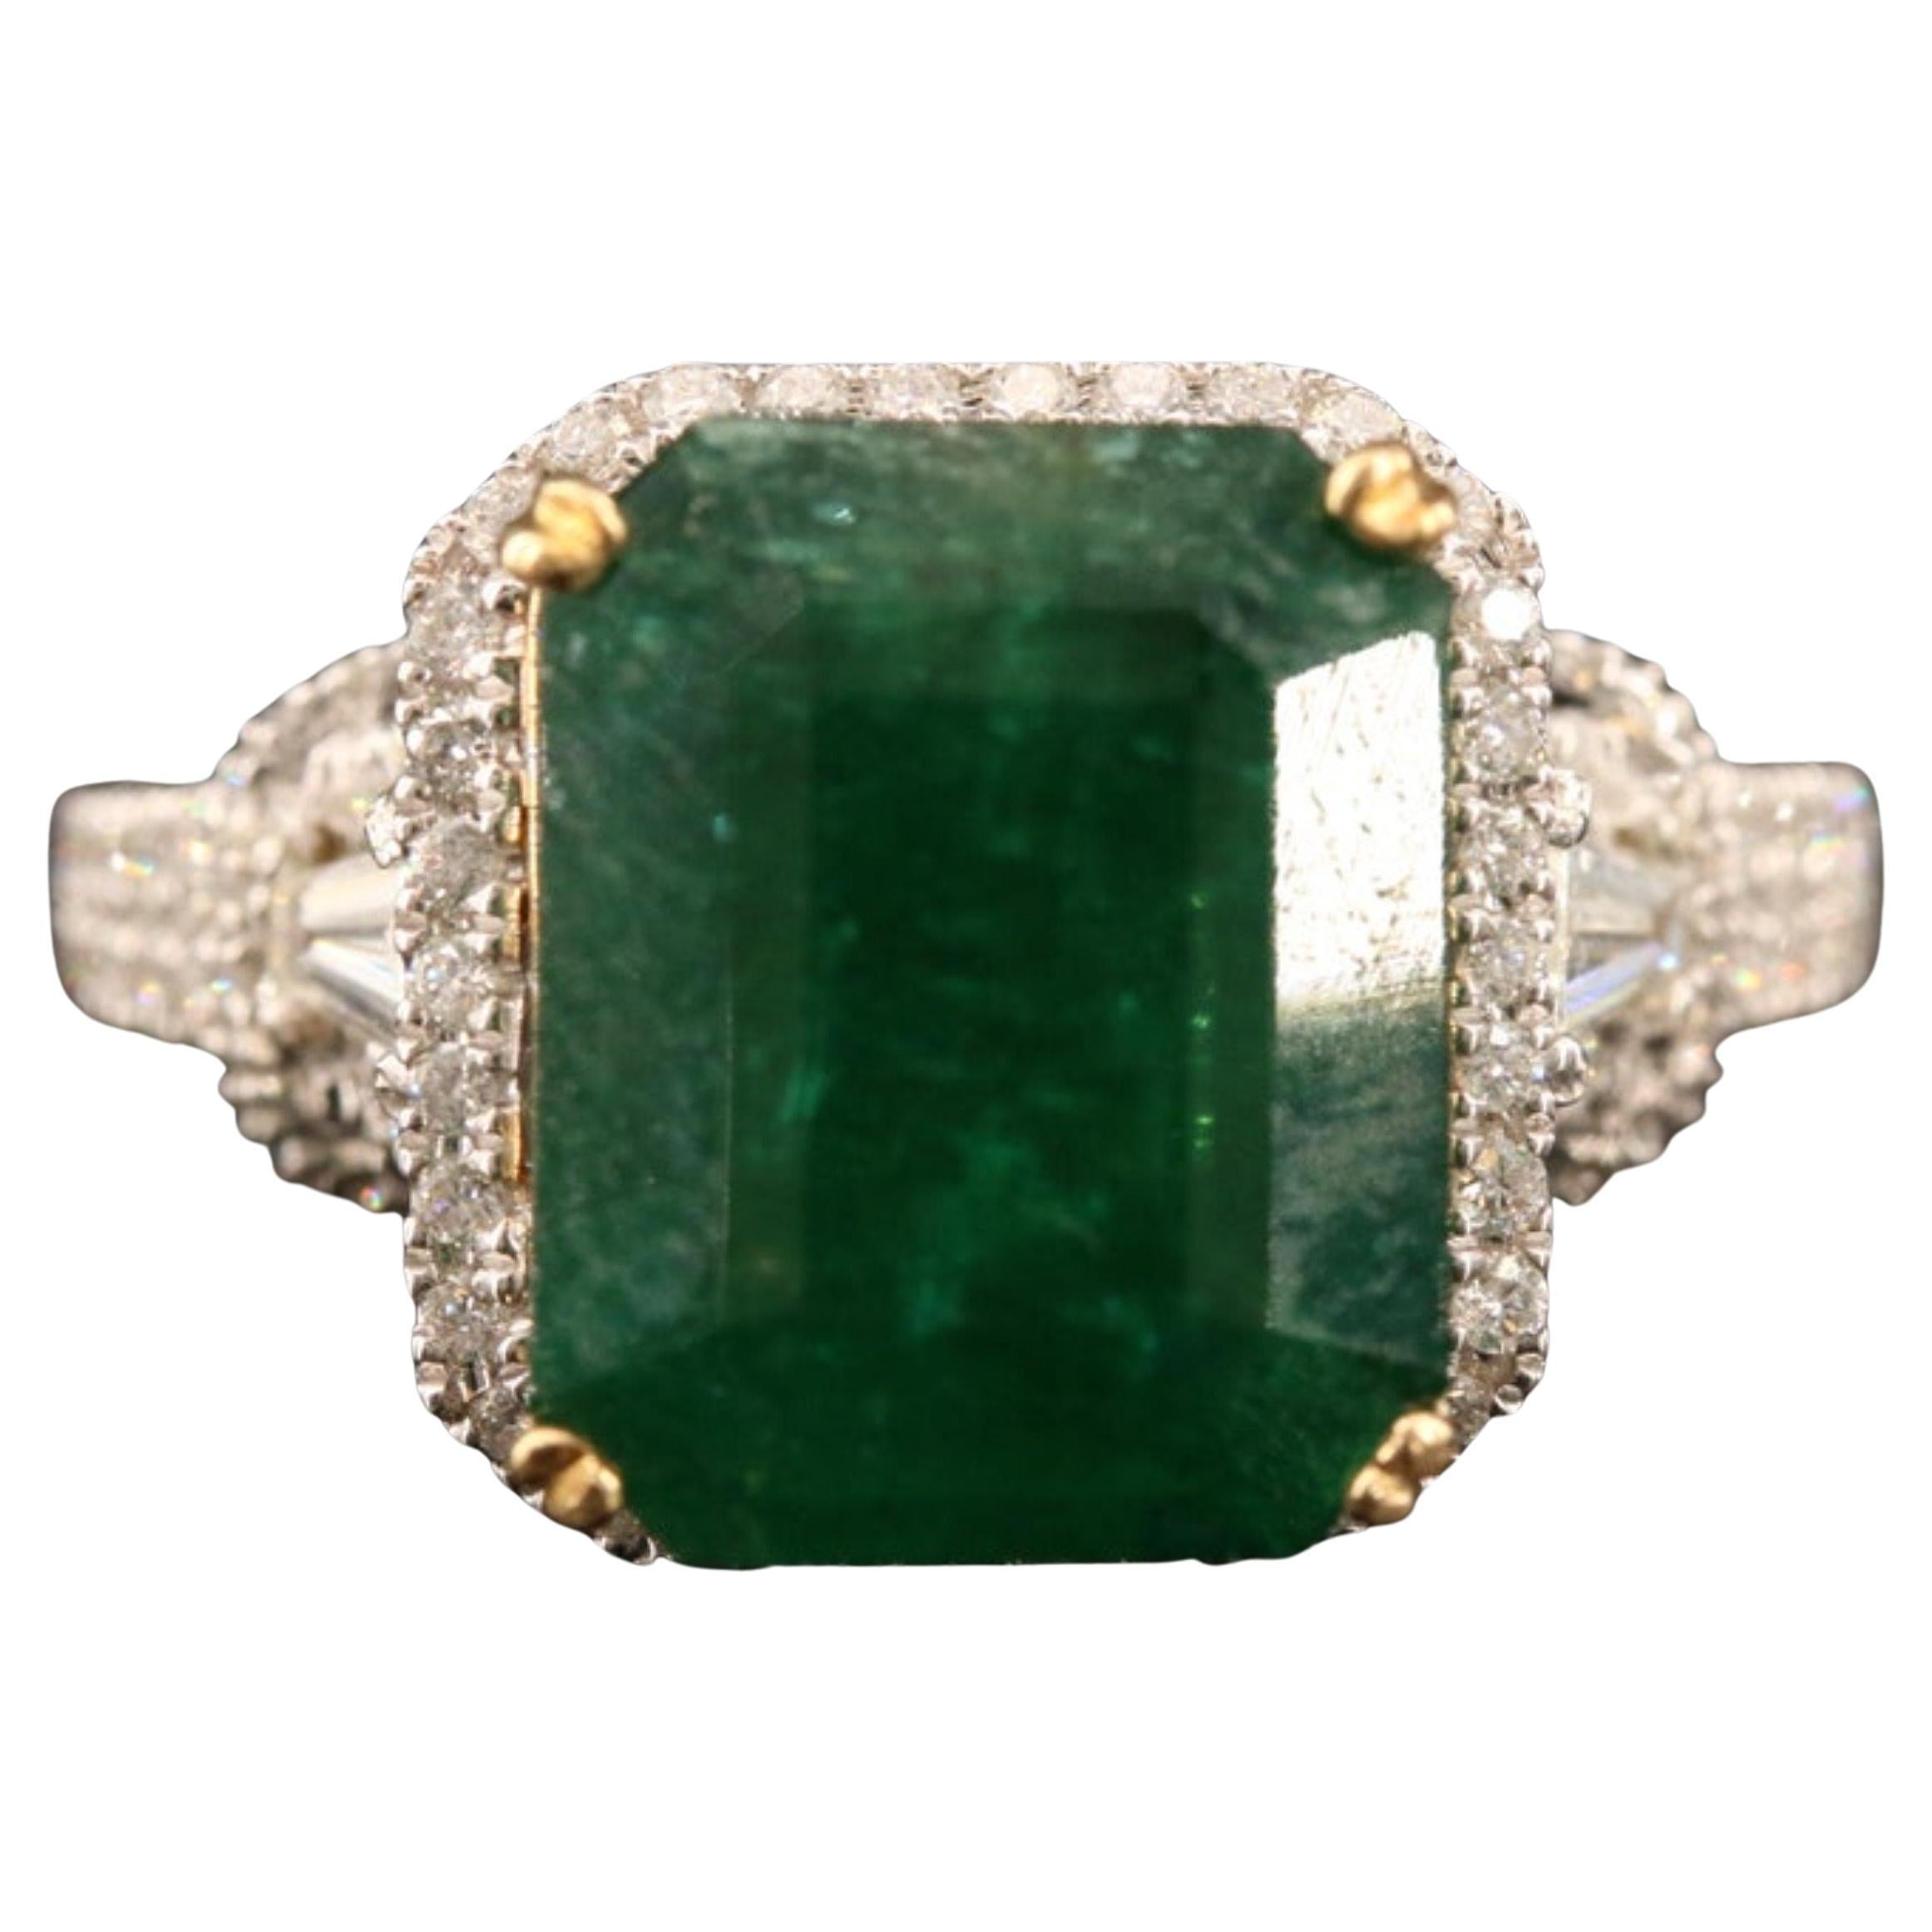 For Sale:  Art Deco 6 CT Natural Emerald Diamond Engagement Ring in 18K Gold, Cocktail Ring